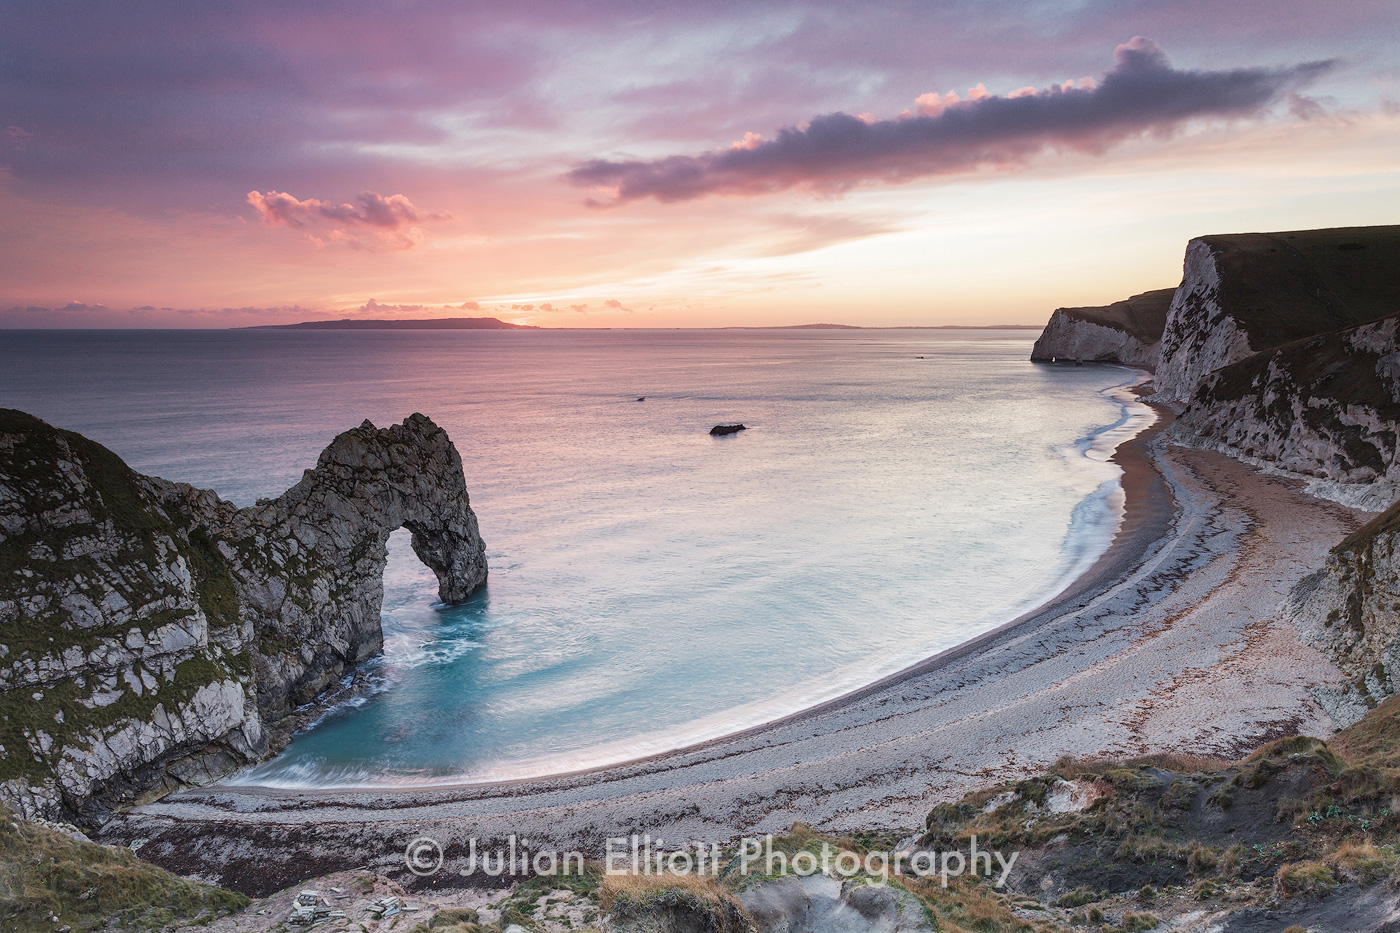 A colourful sunset over Durdle Door